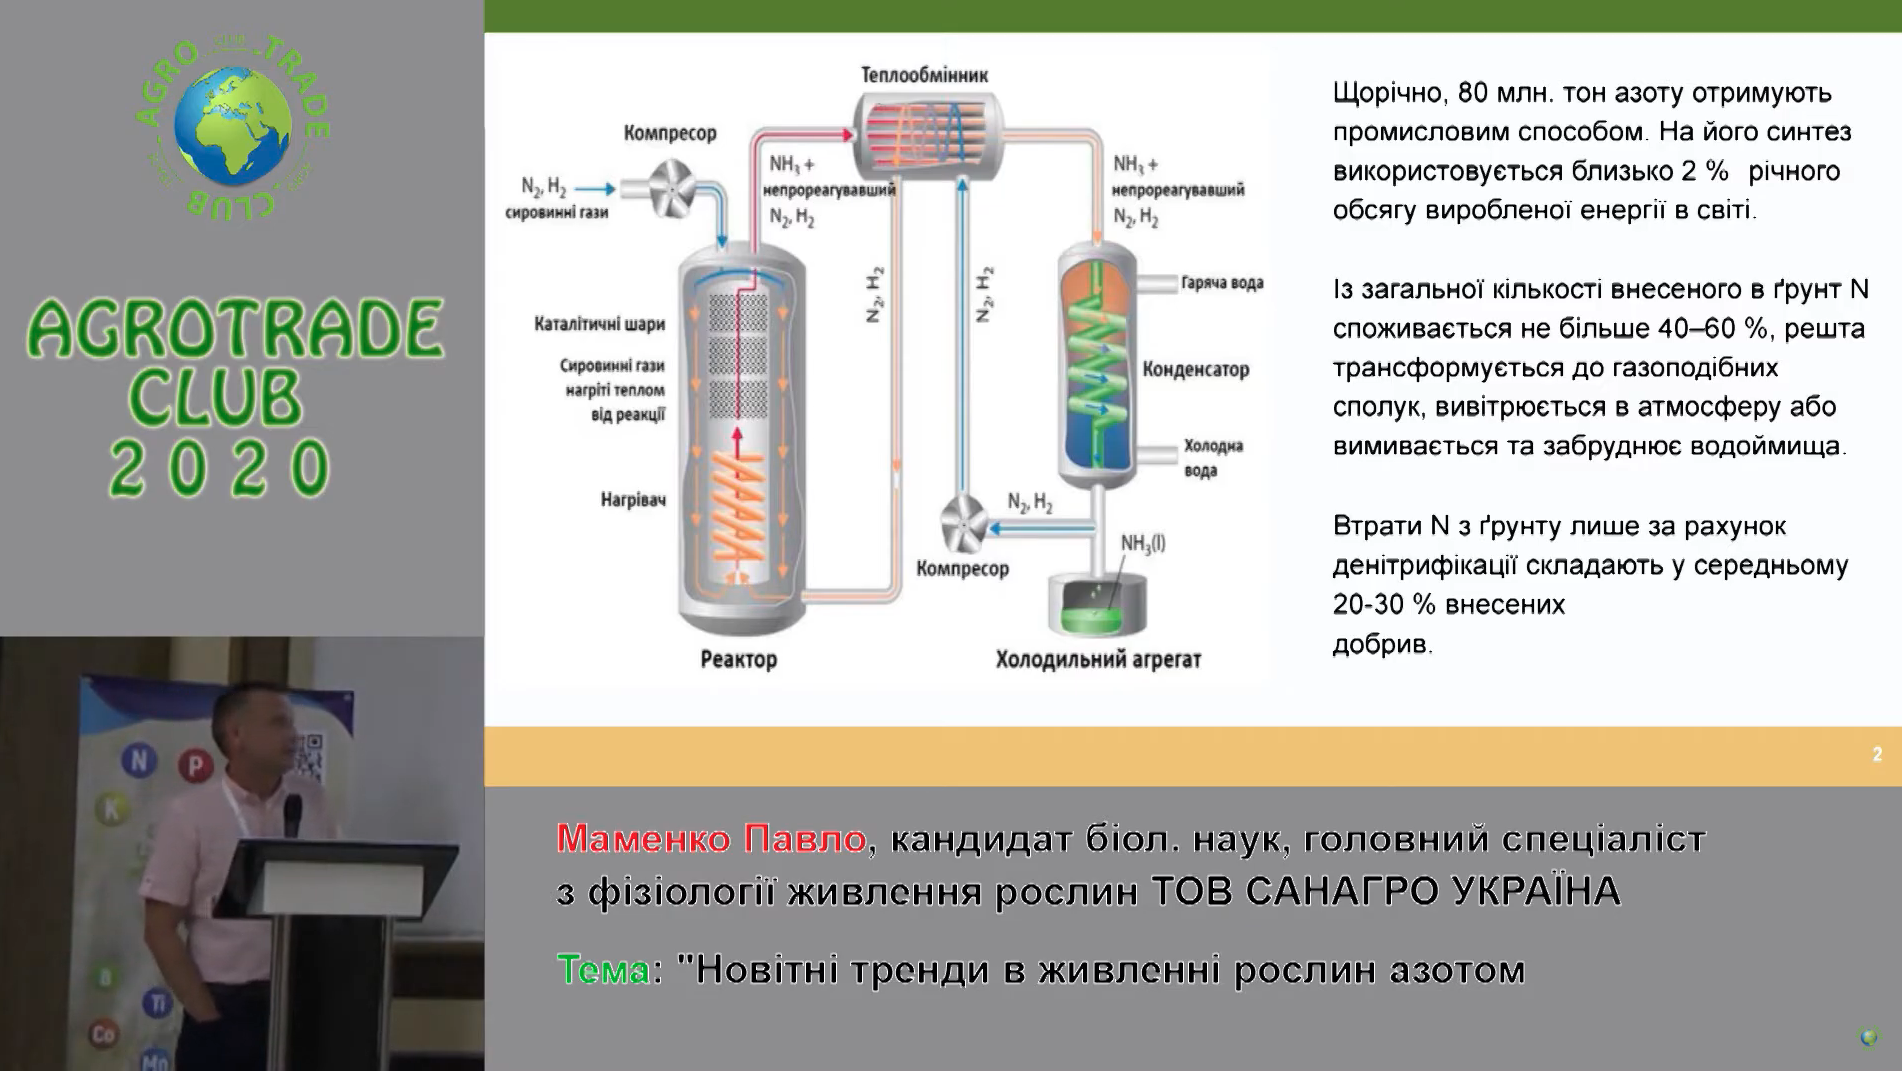 The latest trends in plant nitrogen nutrition. Sunagro Ukraine made a presentation at the Agrotrade Club 2020 conference